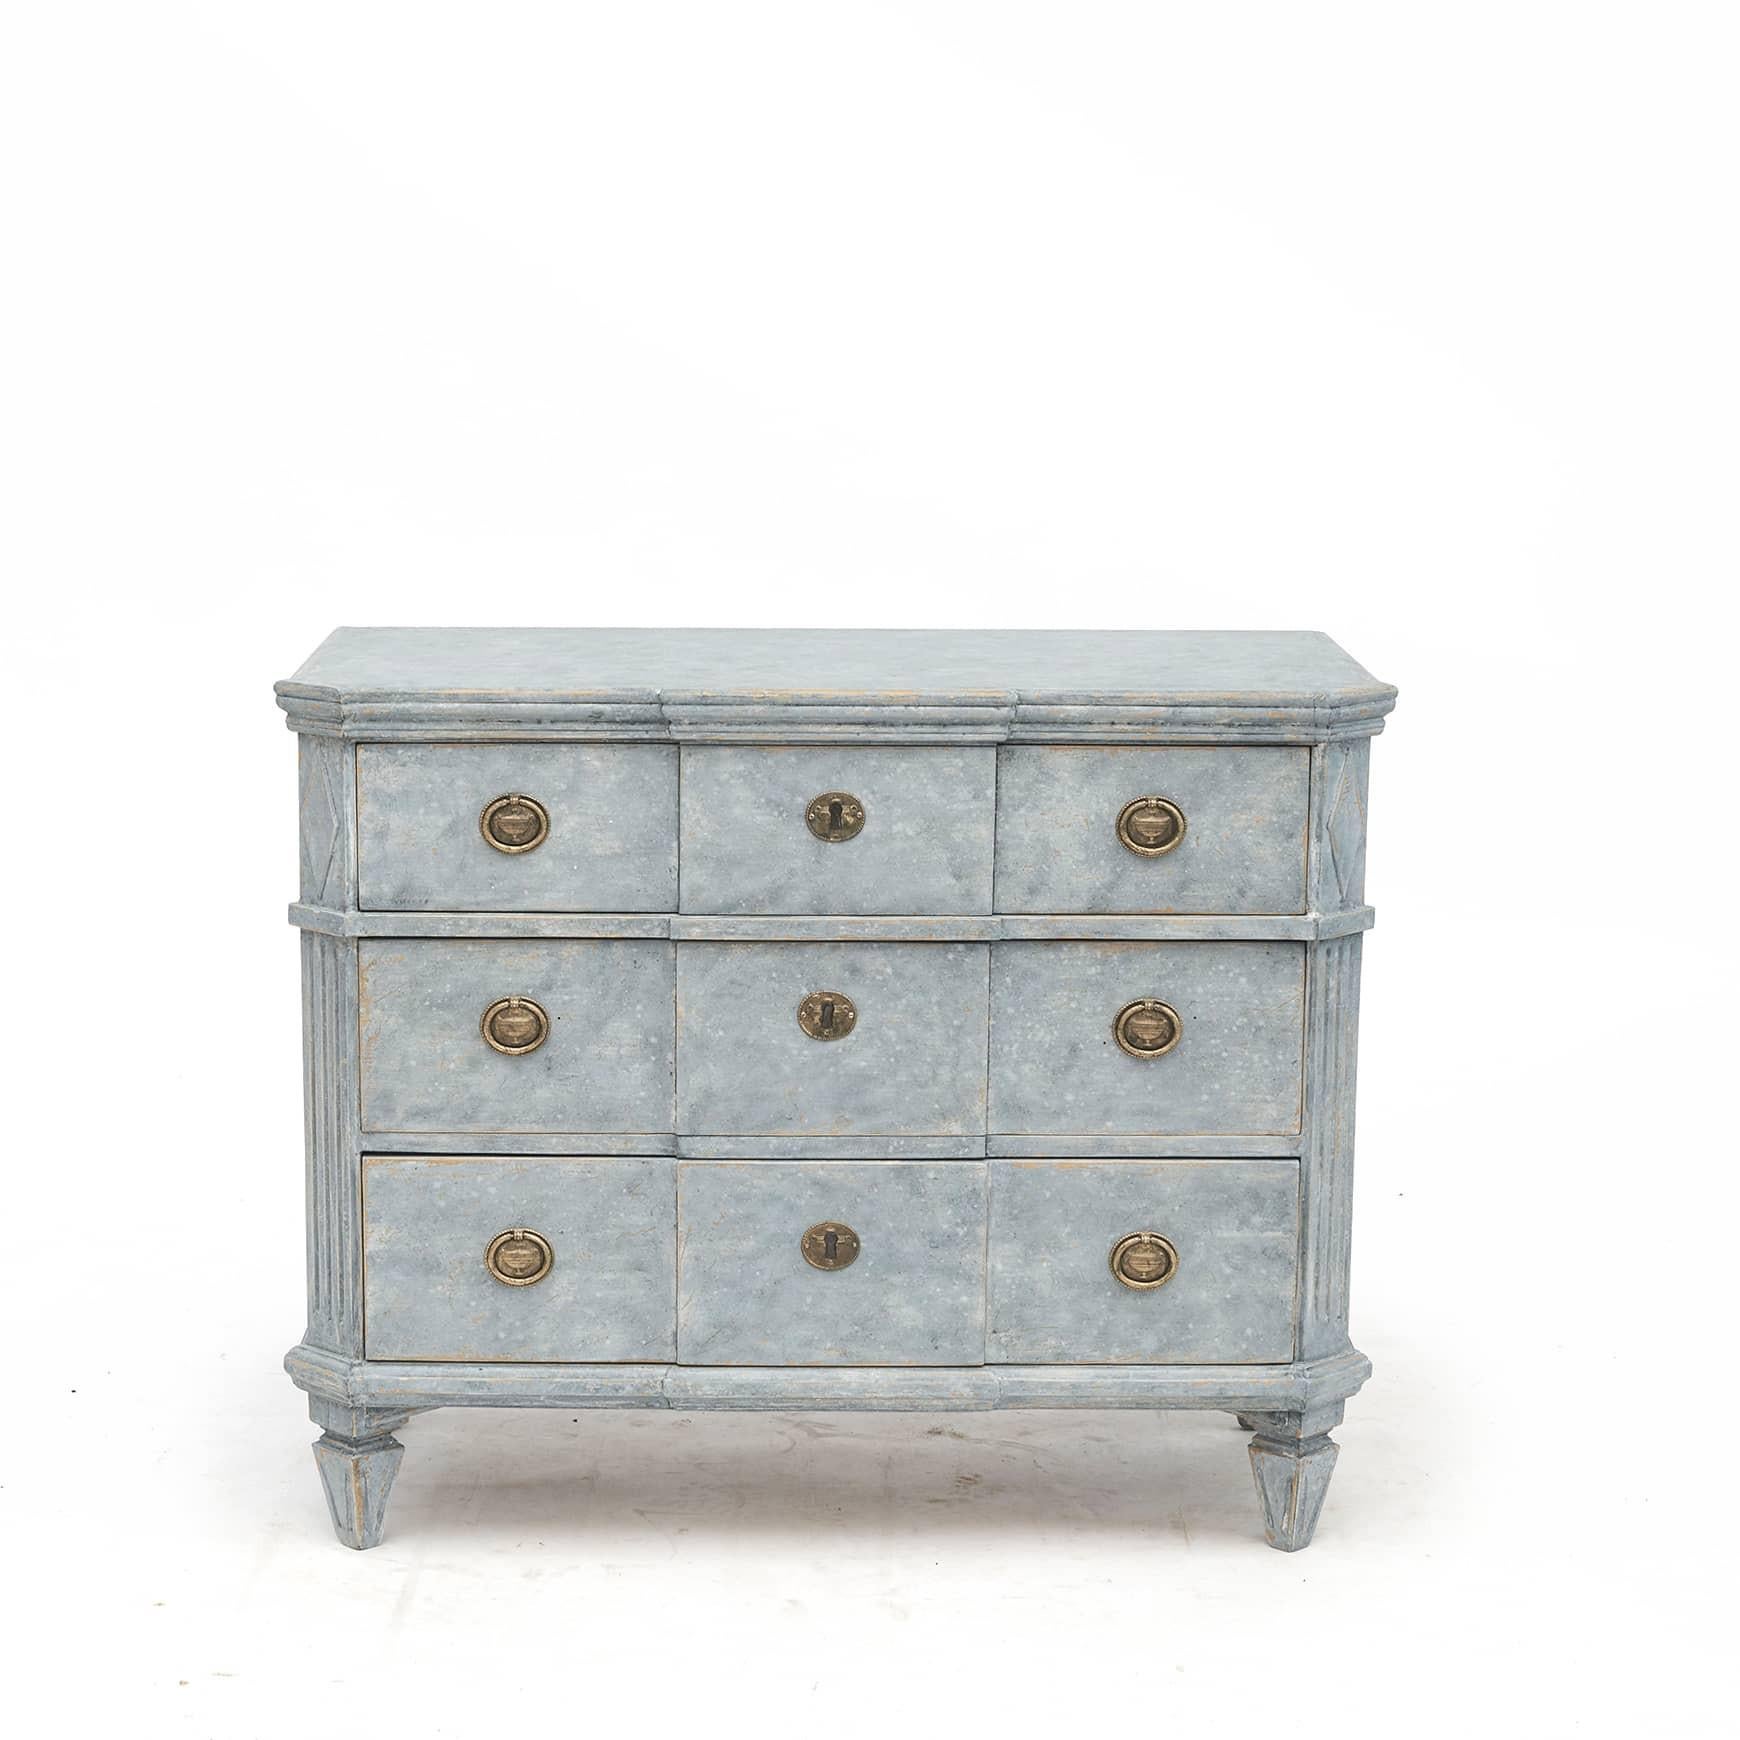 A pair of Swedish Gustavian style painted pine wood chest of drawers from the 19th century.
Each of this pair of blue painted chests features 3 breakfront drawers flanked by canted sides with traditional flutings and diamond motif at the top.